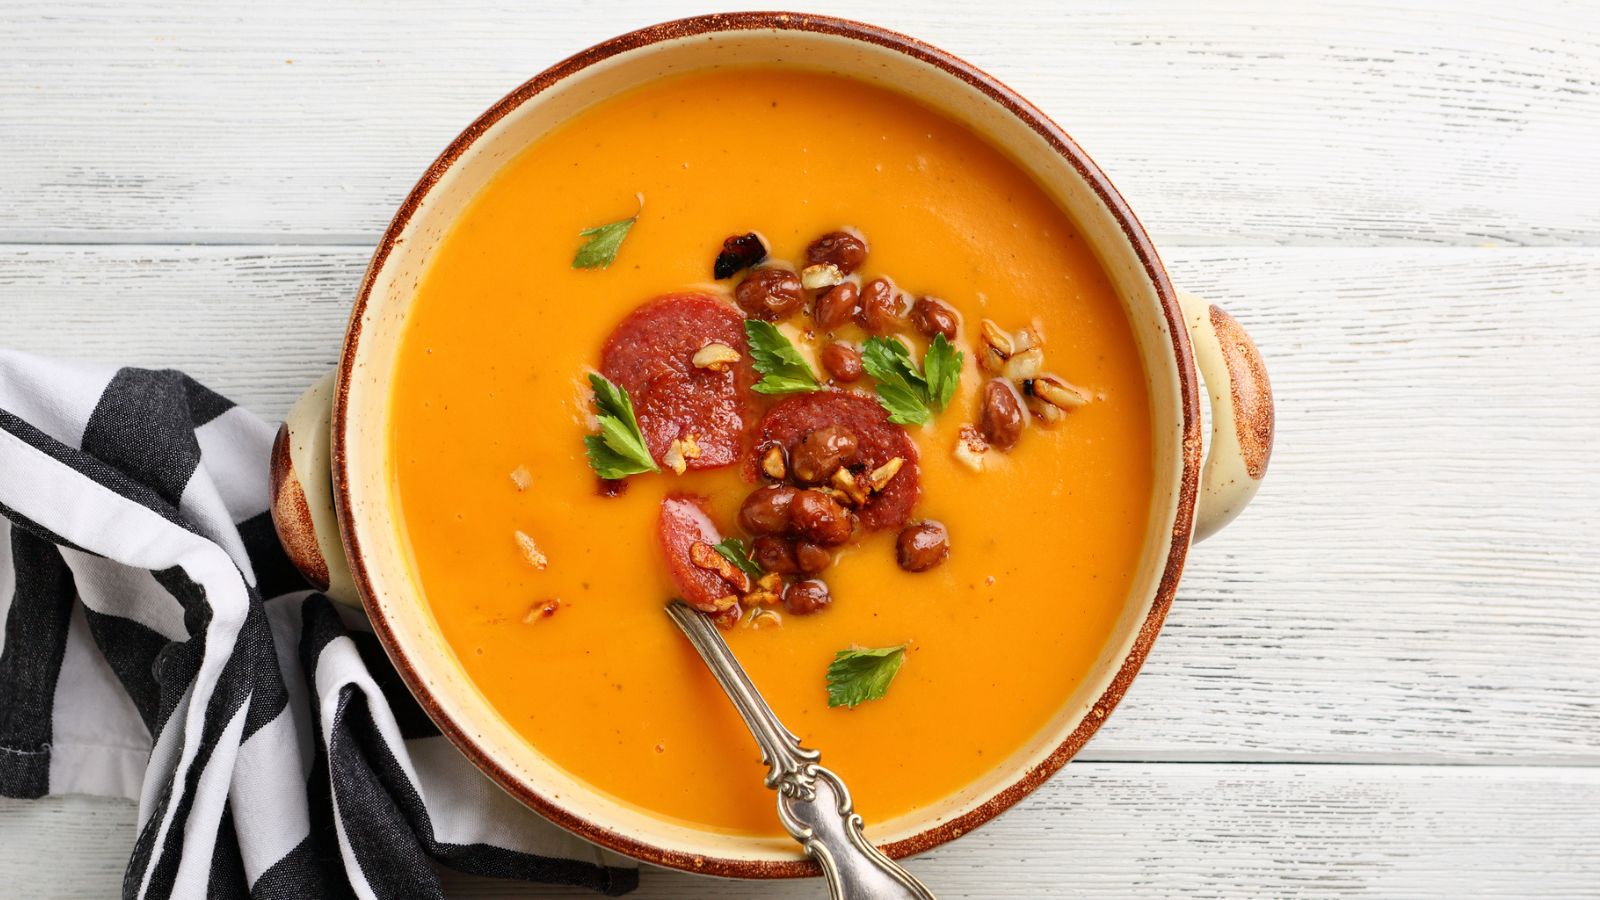 22 Exciting Recipes Featuring Pumpkin and Butternut Squash